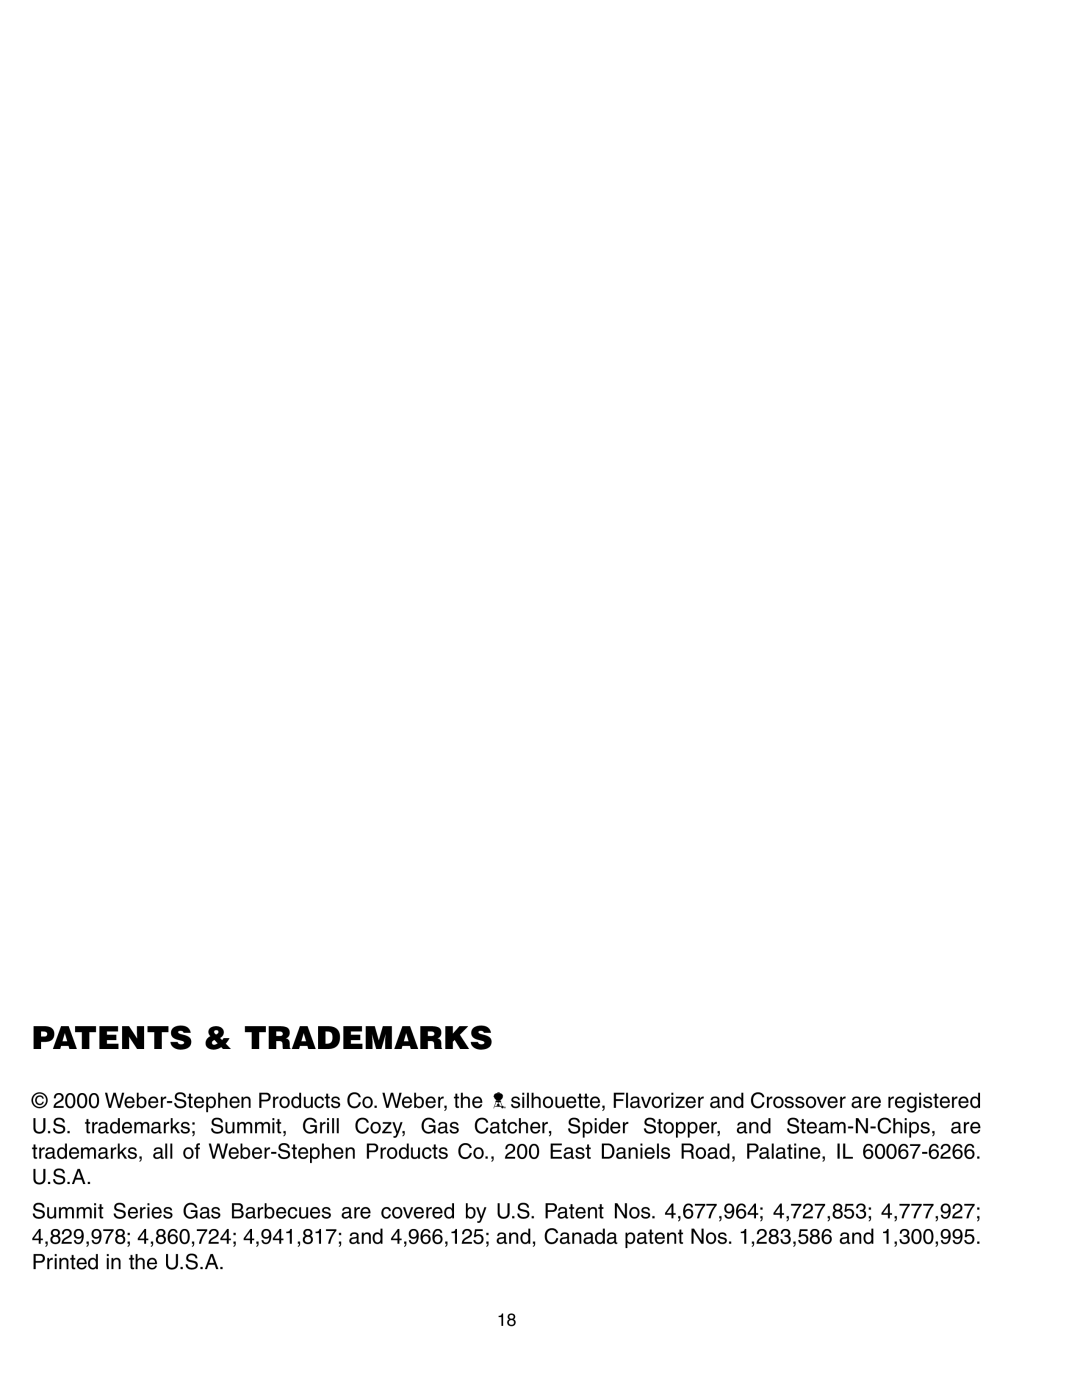 Weber 650 manual Patents & Trademarks 